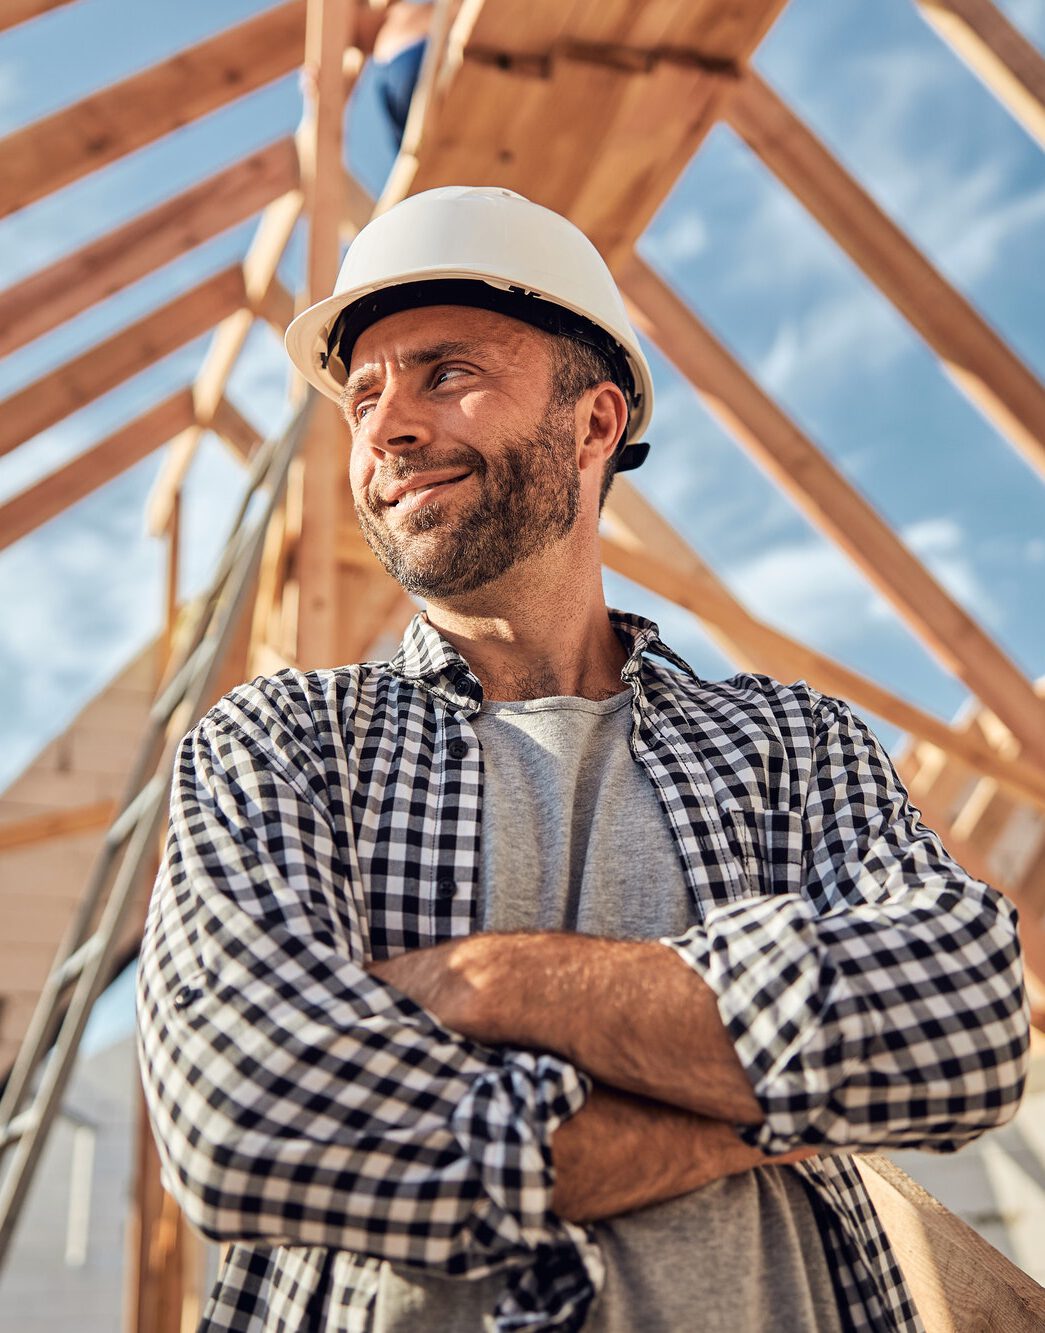 Pleased man in a hard hat posing under a wooden roof